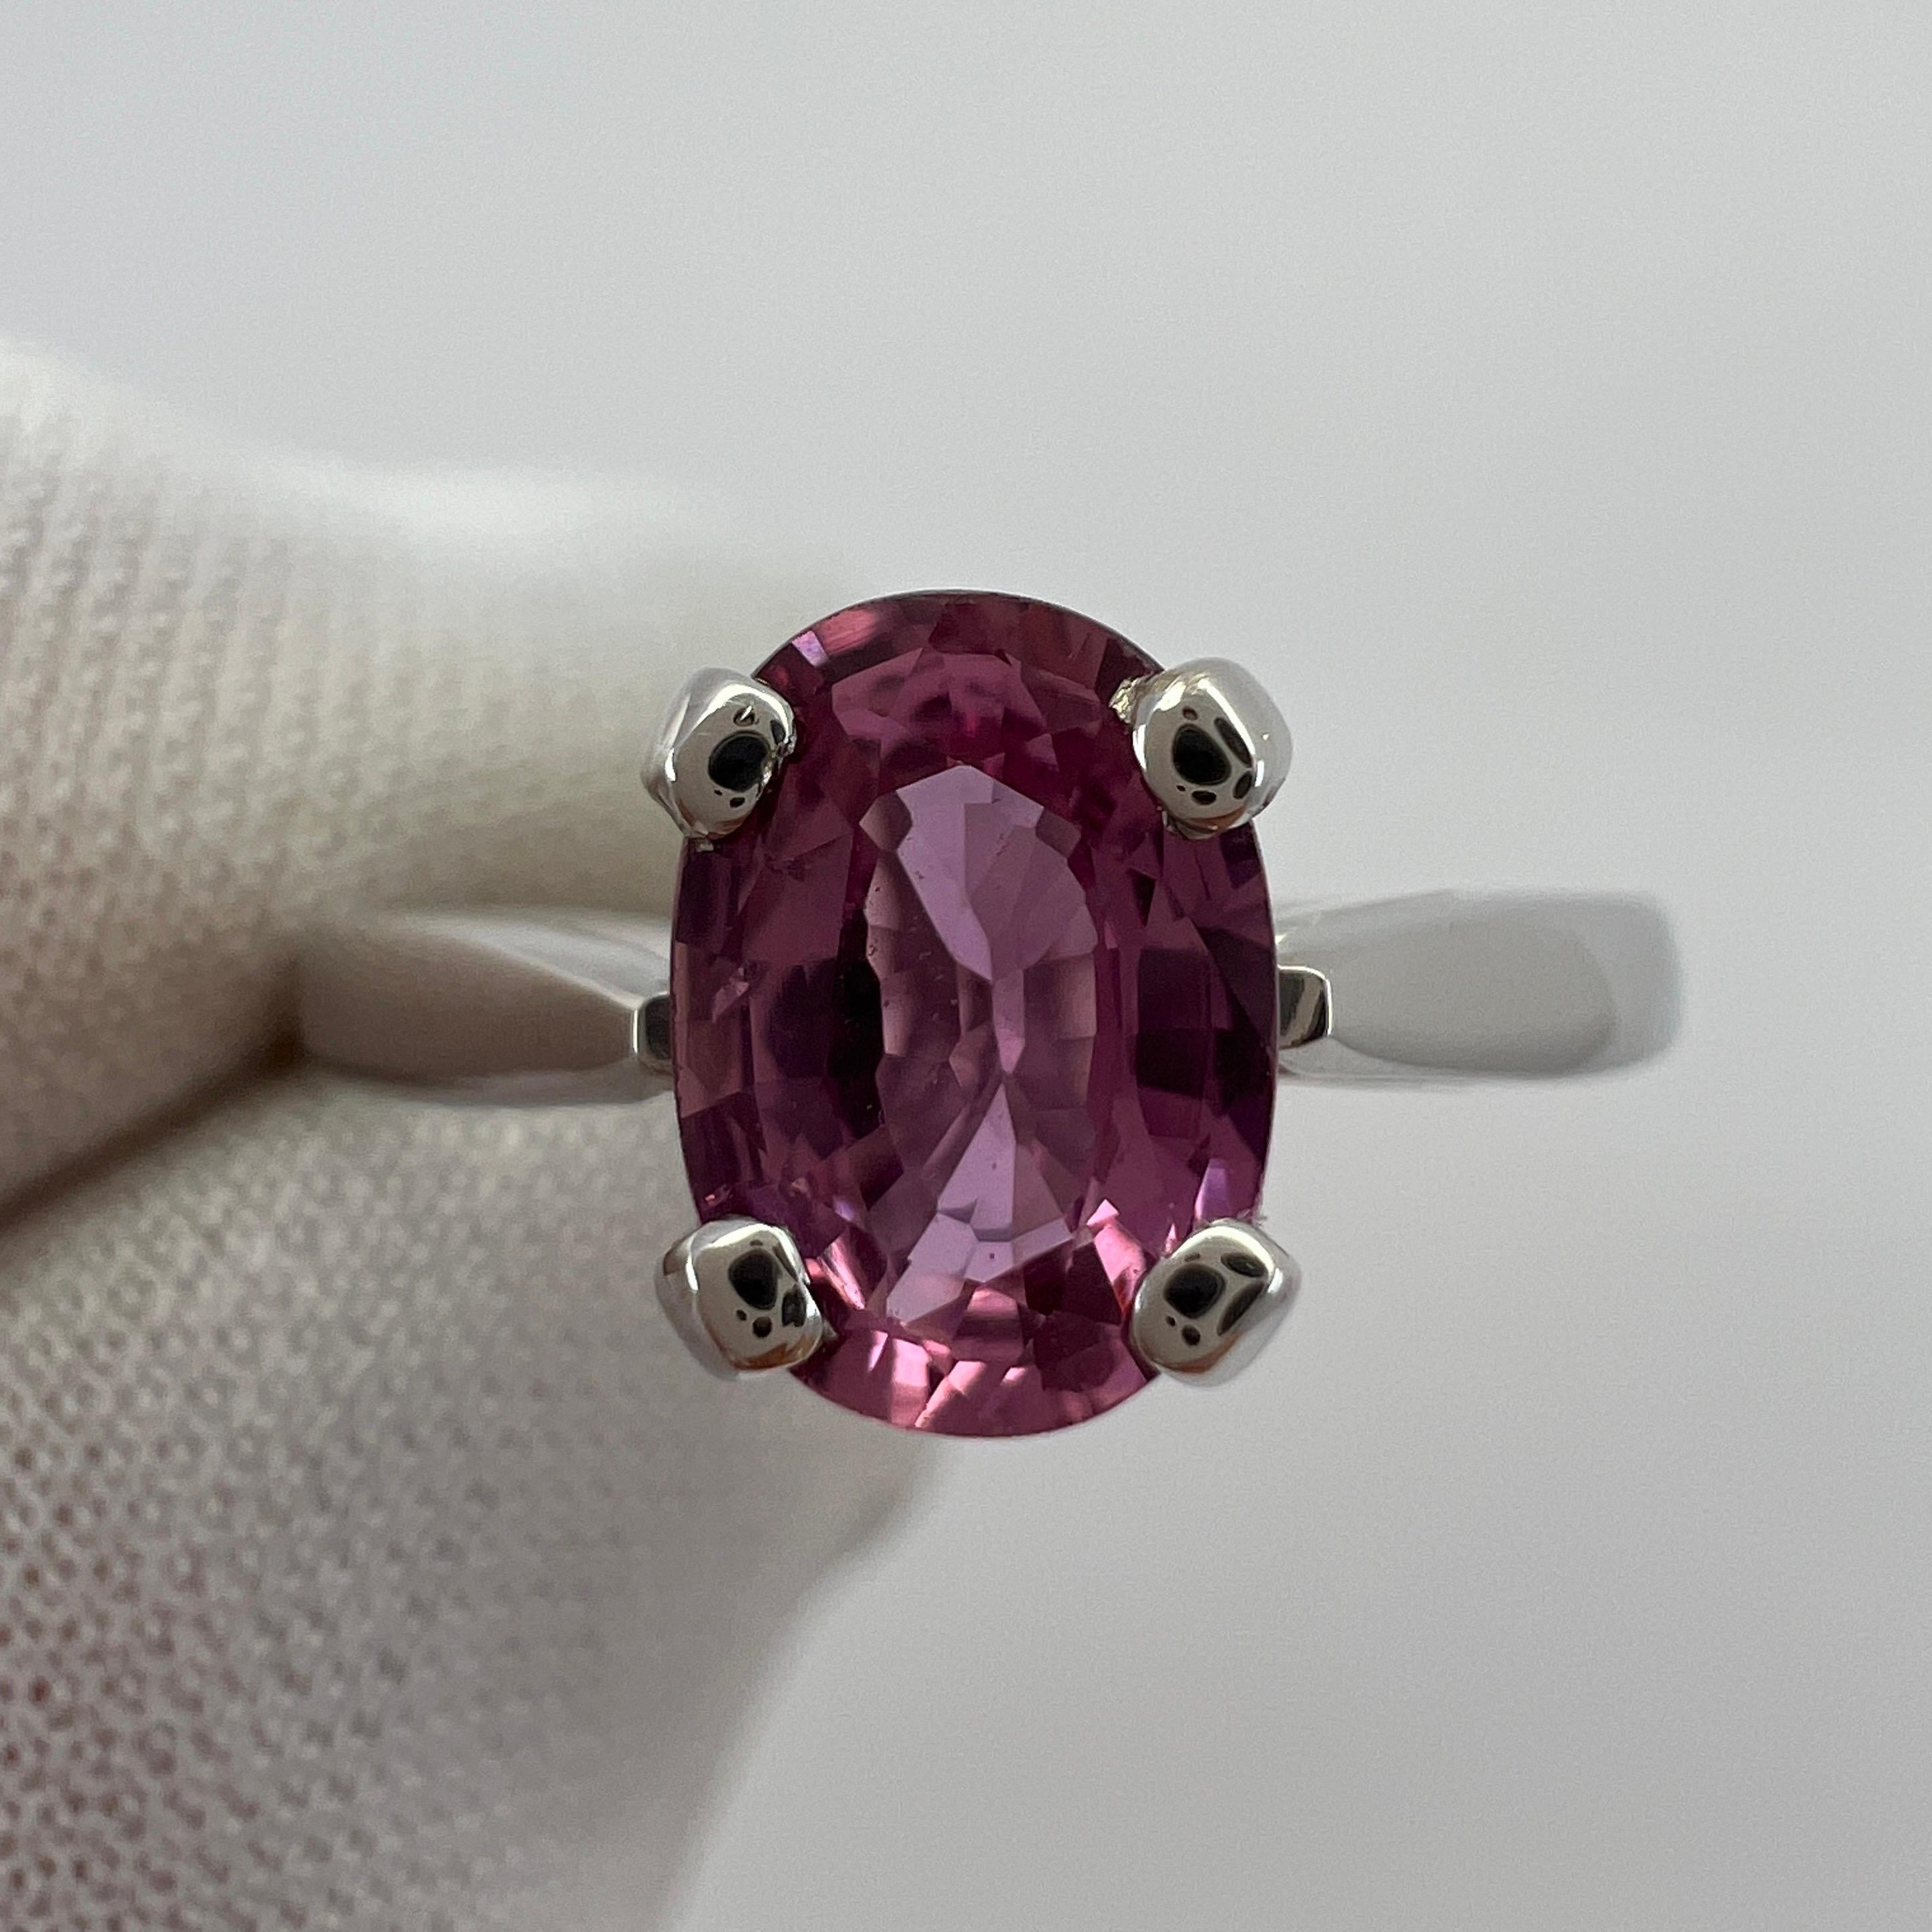 Fine Natural 1.05ct Vivid Pink Sapphire Oval Cut 18k White Gold Solitaire Ring For Sale 2